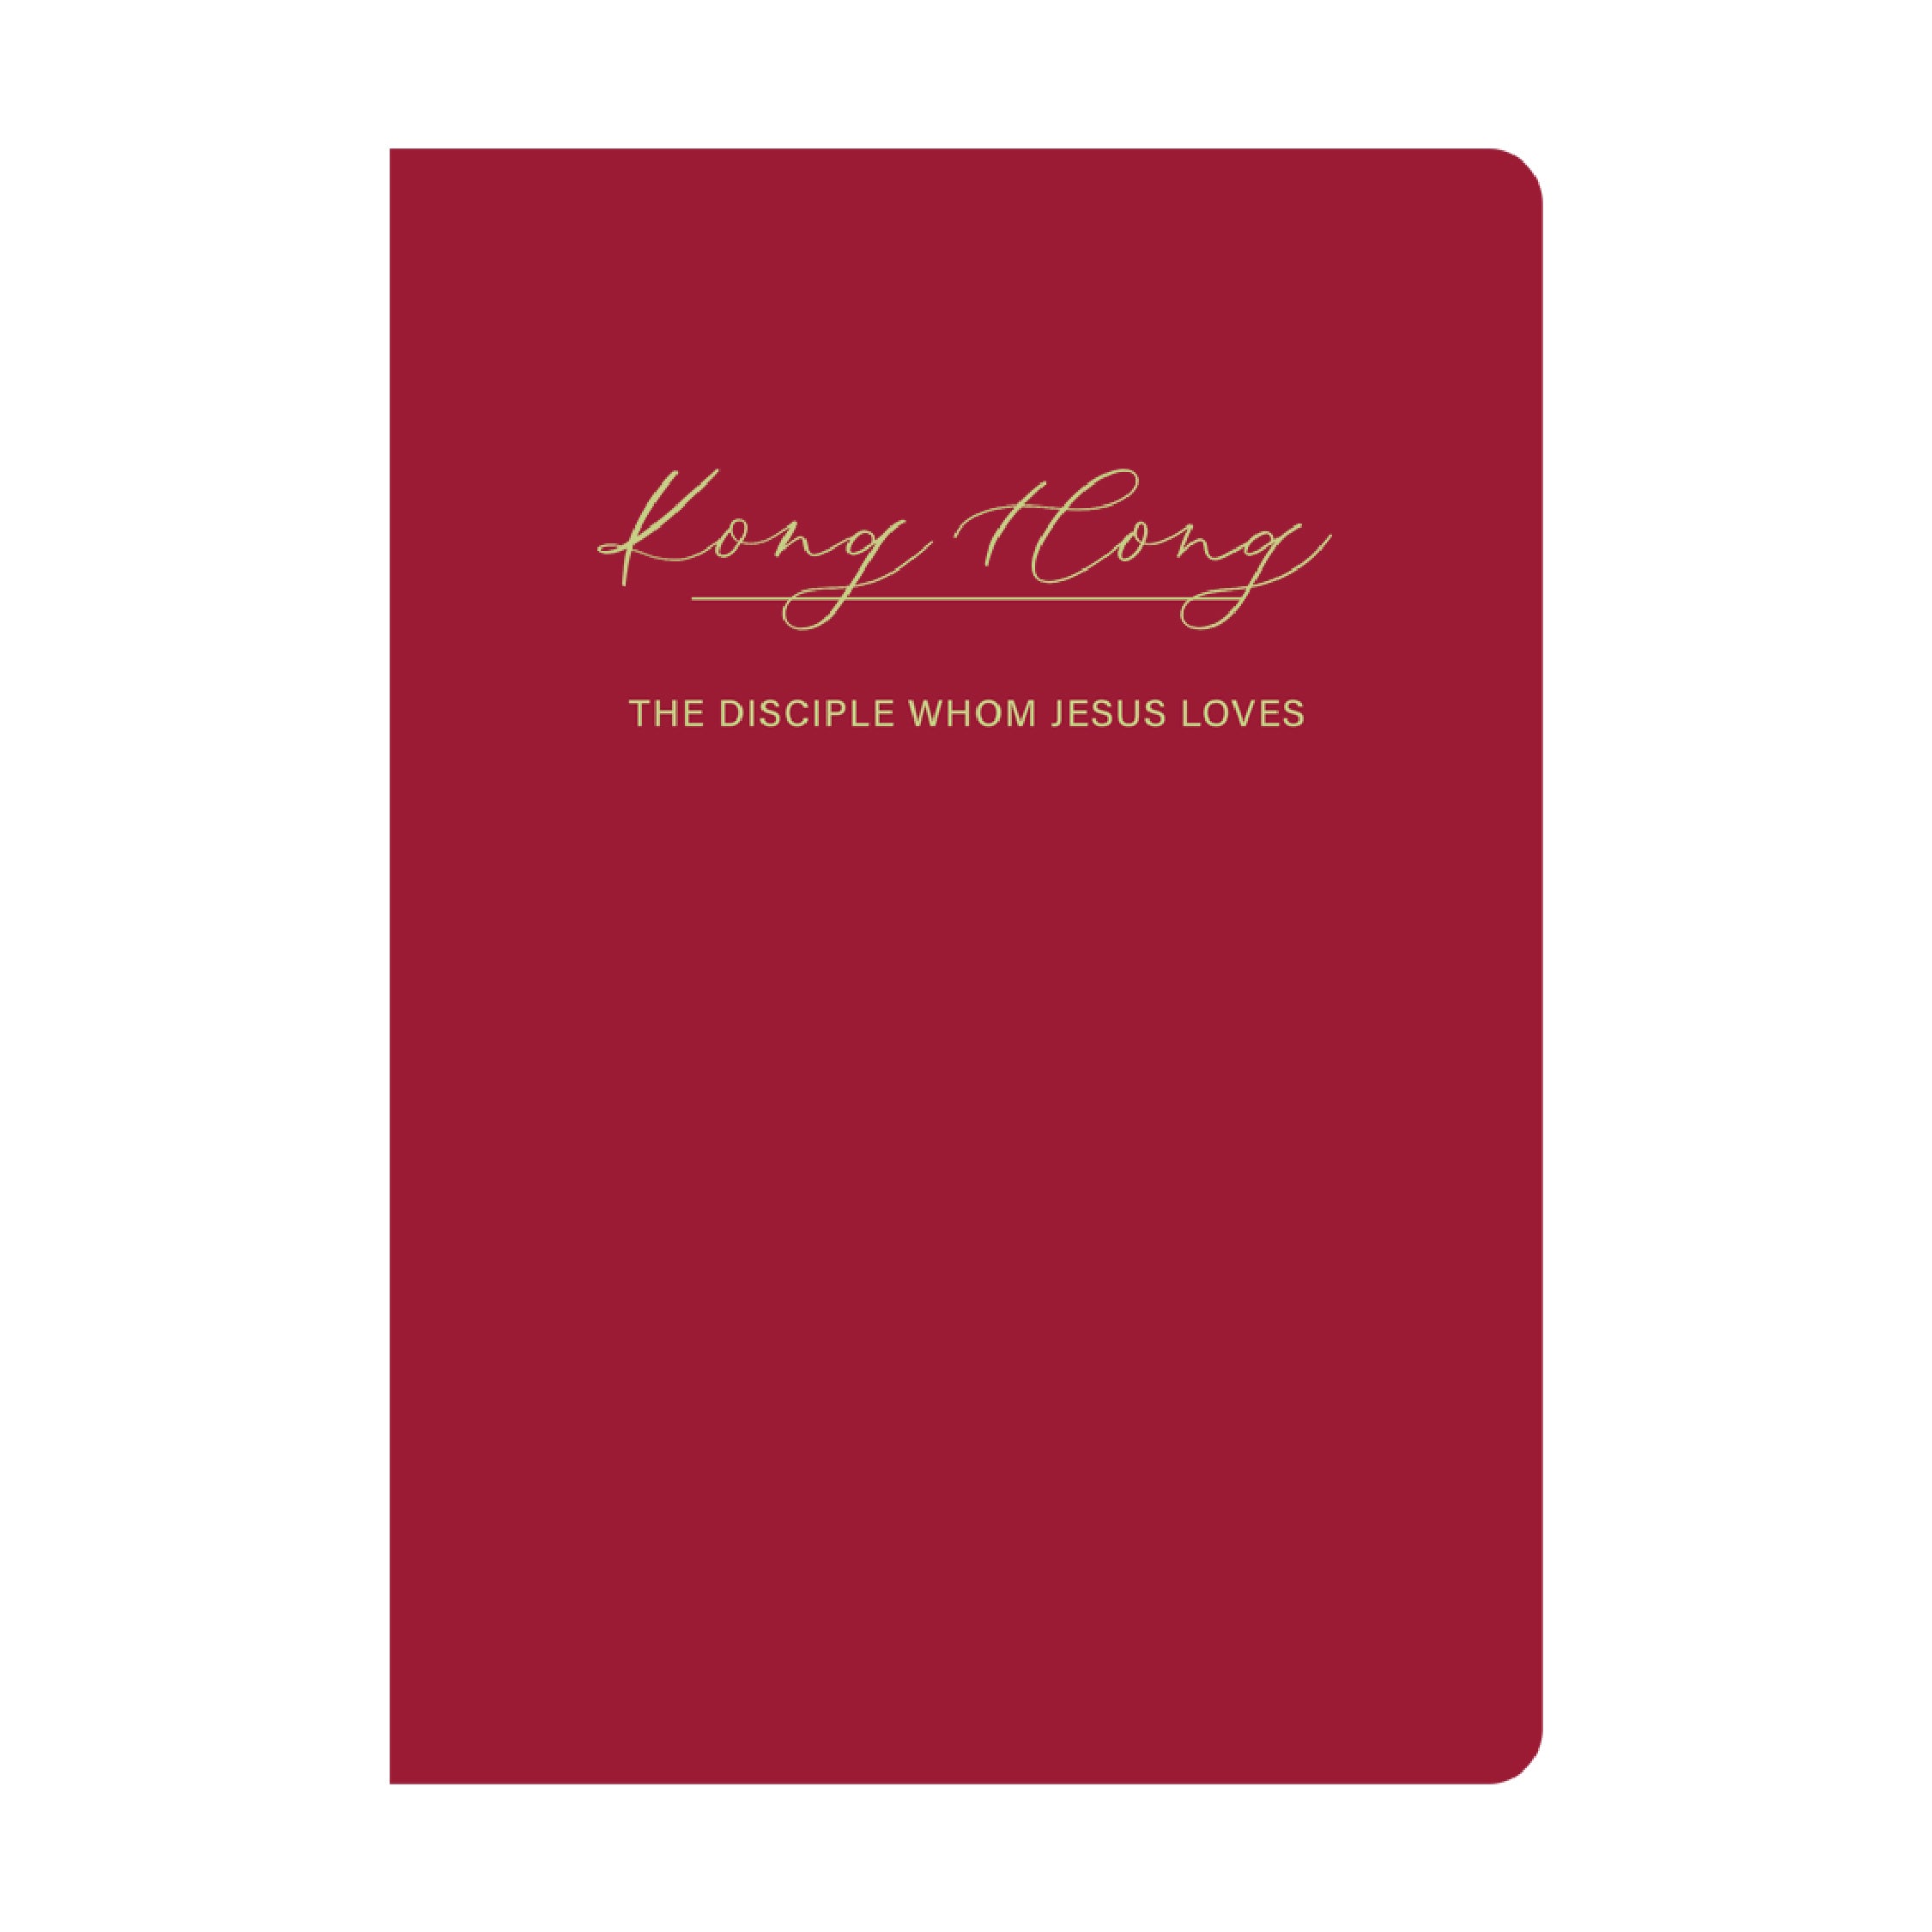 Customisable Christian Gift: Personalisable Christian Notebook | Custom Name A5 Leather Journal in Crimson Red and Gold